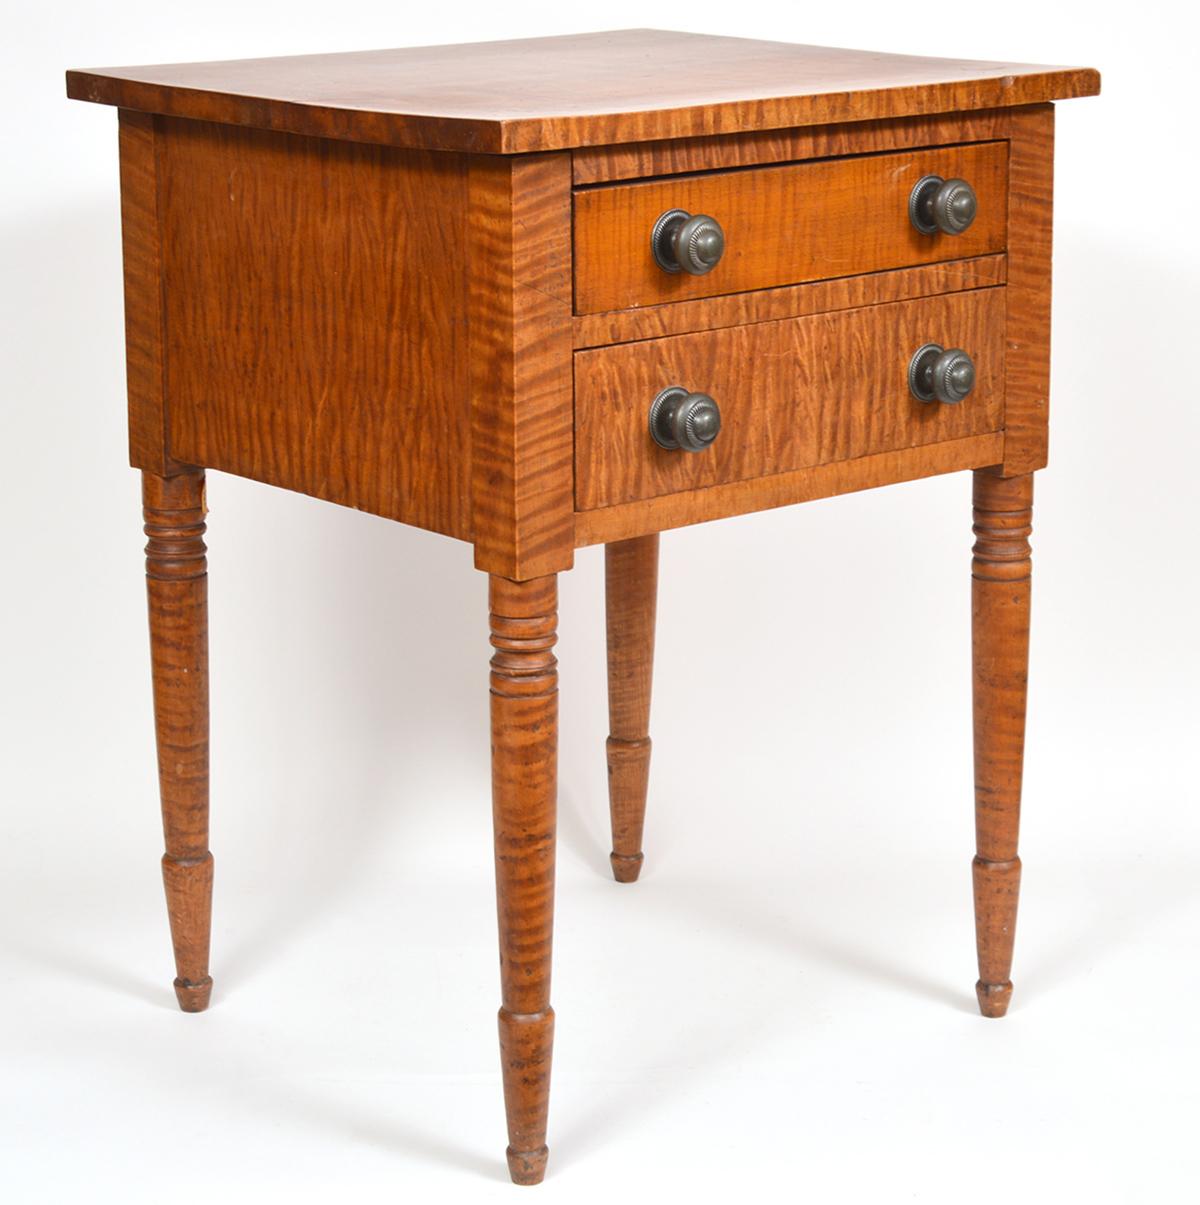 19th Century Early American Federal Two-Drawer Tiger Maple Work Table or Stand